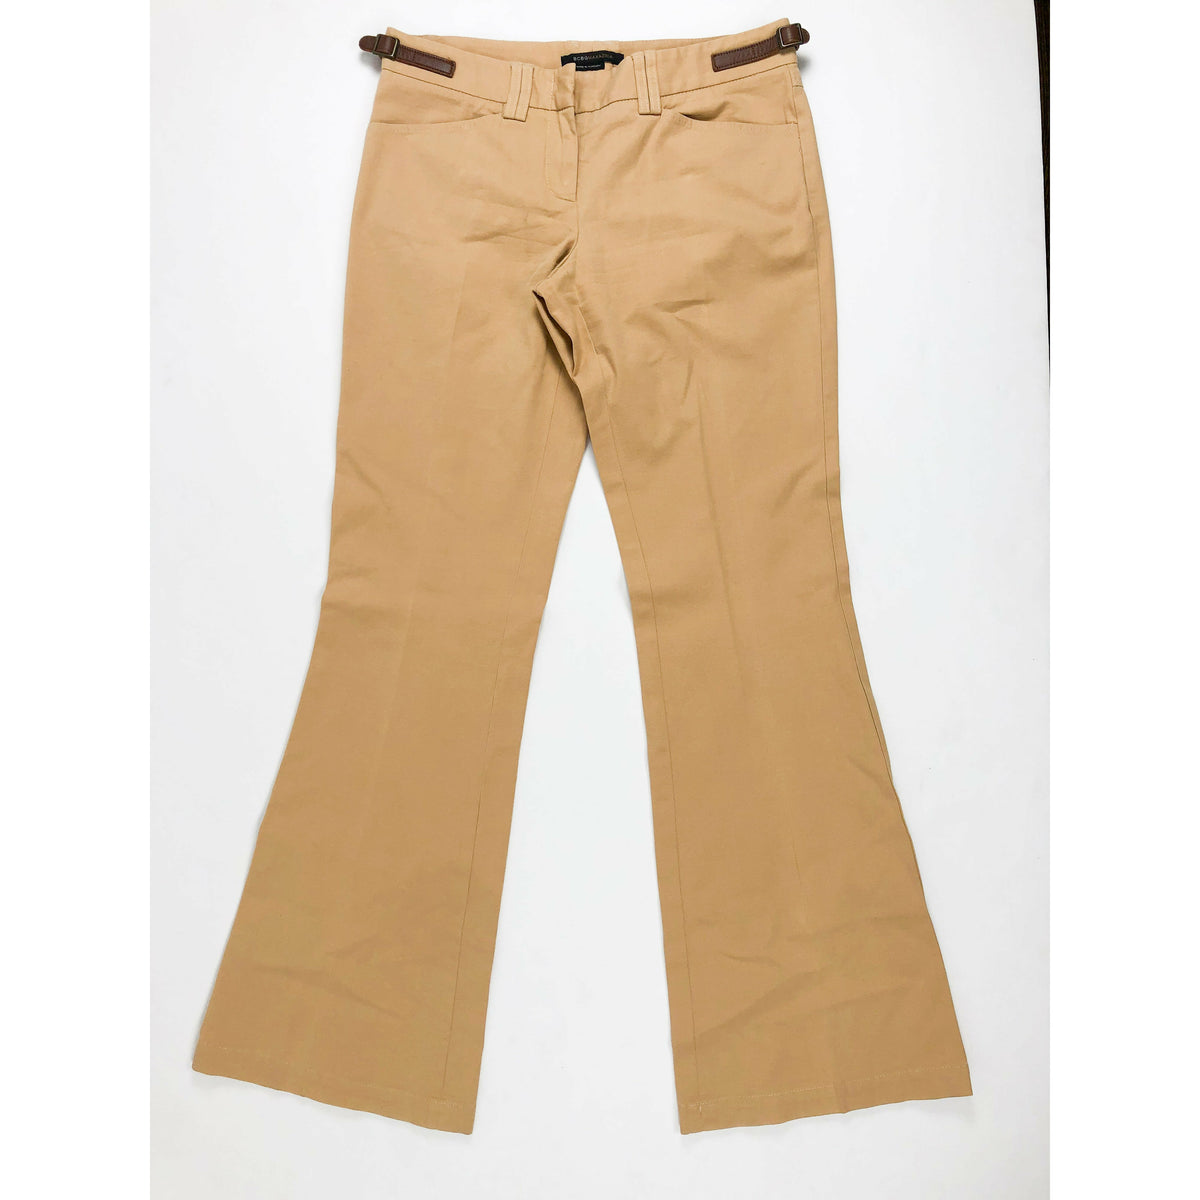 BCBG MAX AZRIA - Tan pants with belt attached